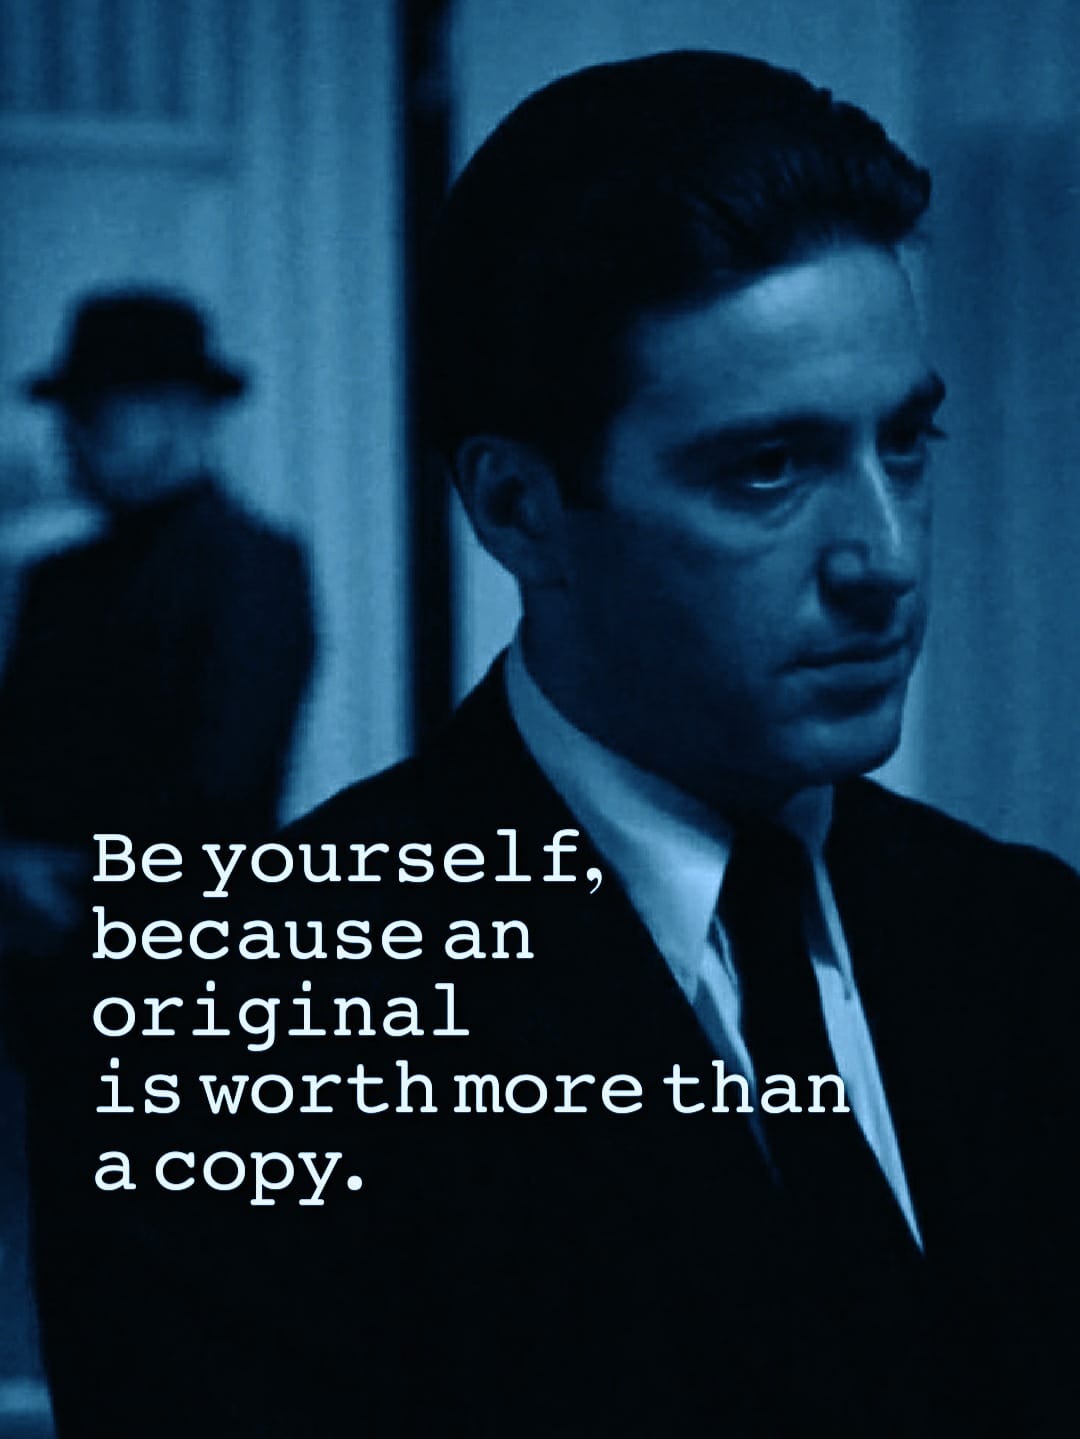 Be yourself because an original is worth more than just a copy.